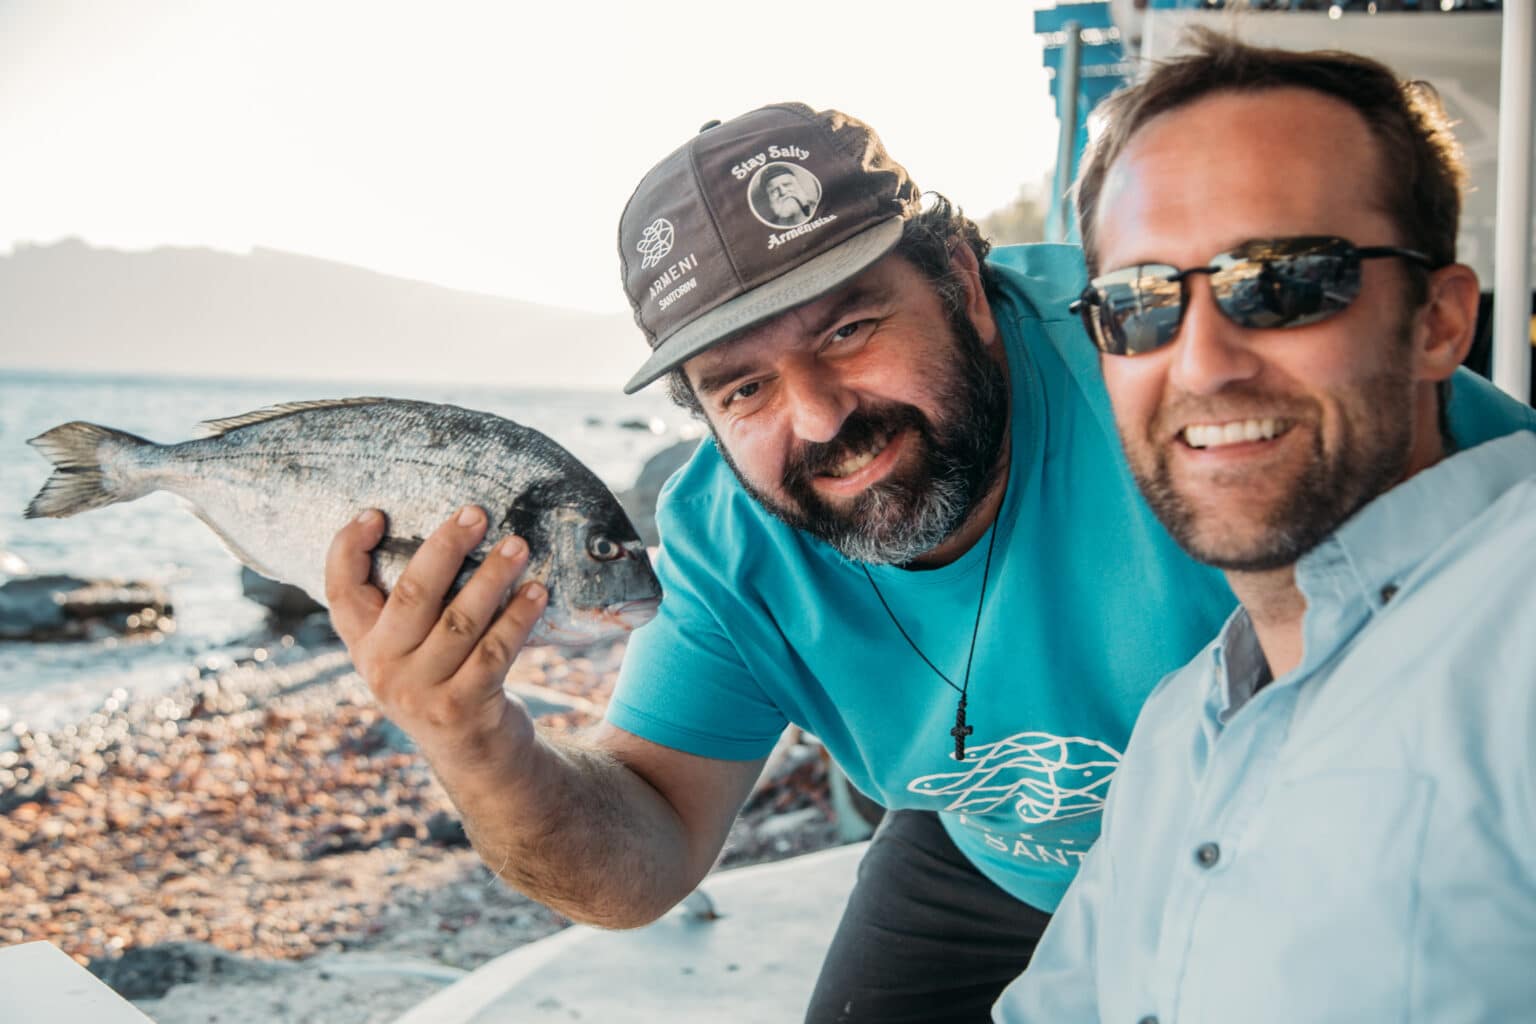 2 men smiling and wearing blue shirts while holding a fish